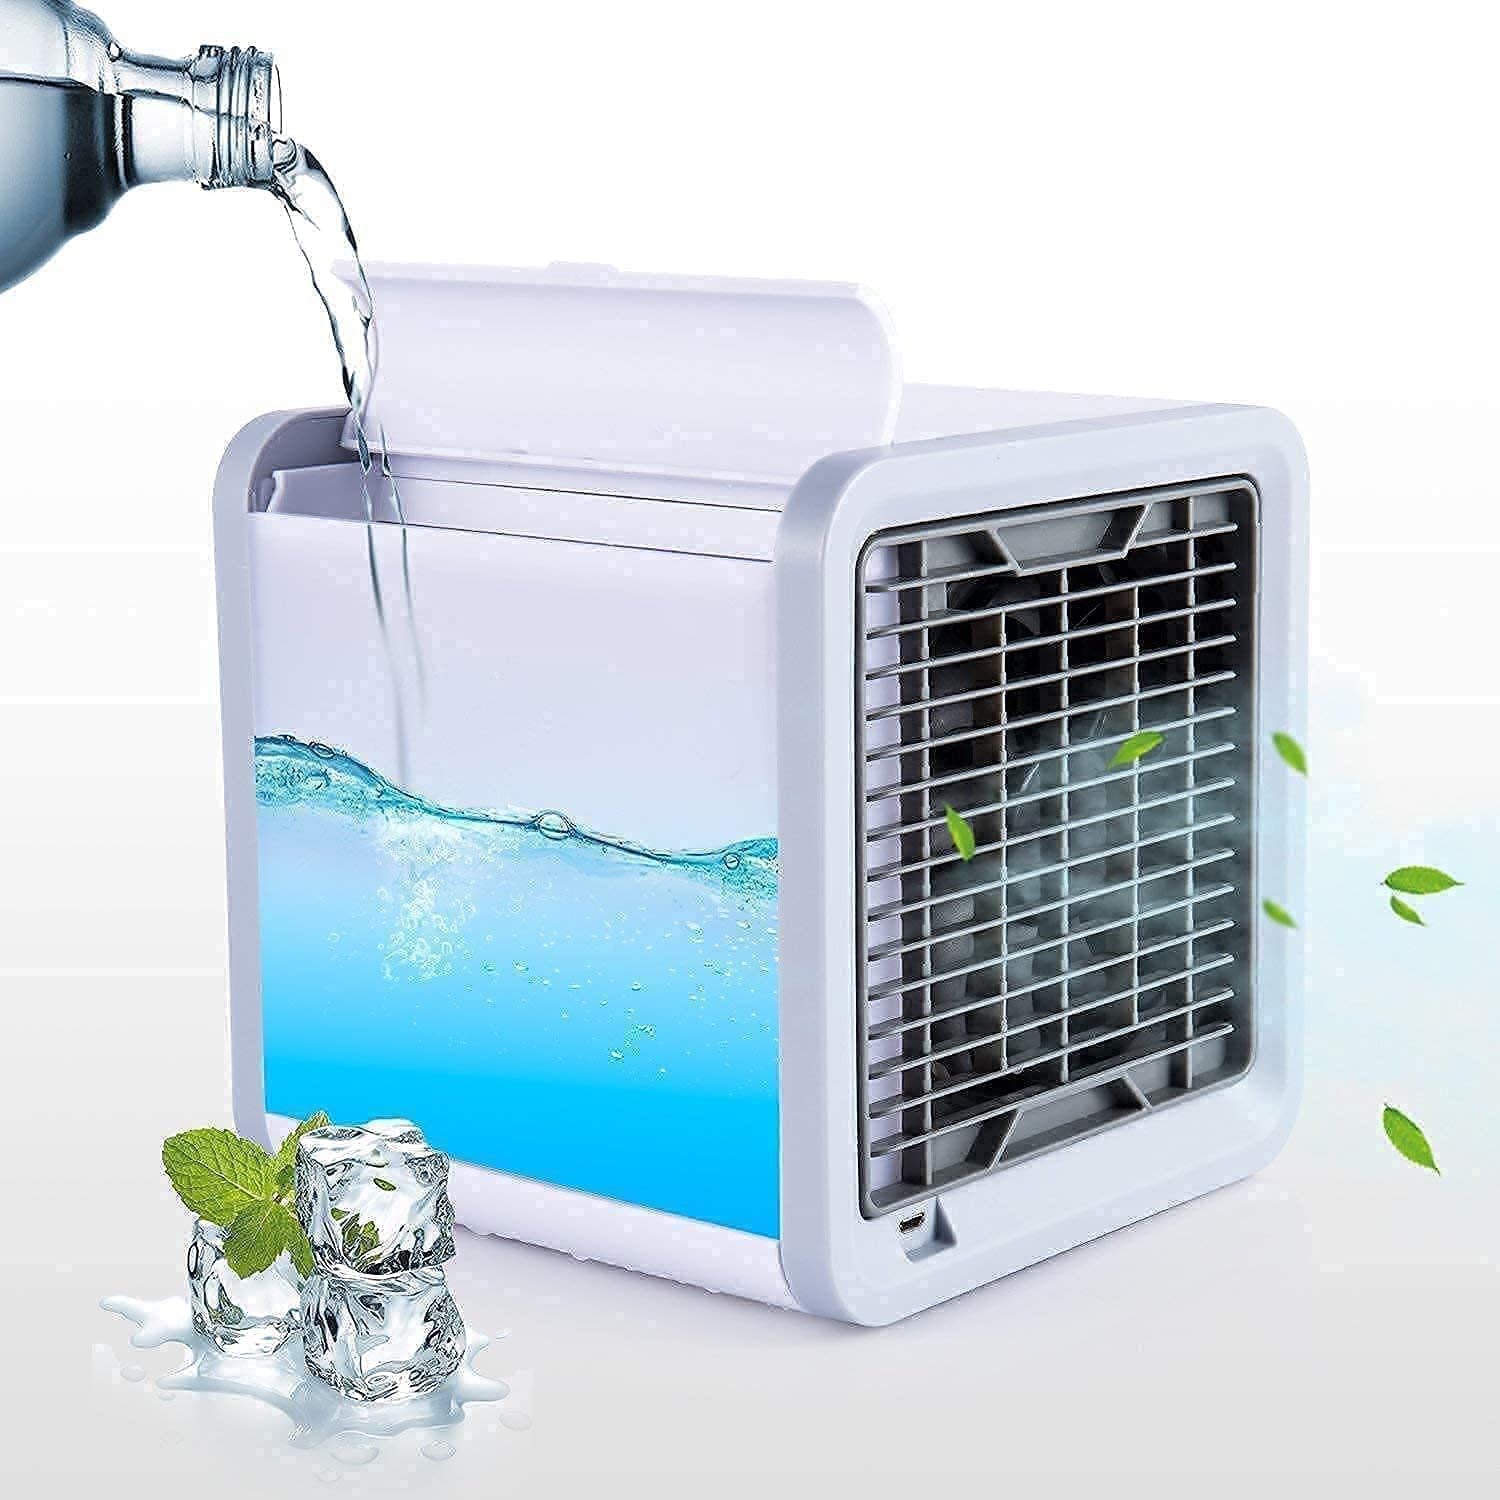 JASH-ENTERPRISE-Mini-cooler-for room-cooling-mini-cooler-ac-portable-air-conditiioners-for Home-Office-Artic-Cooler-3-In-1-offers & Discounts- 